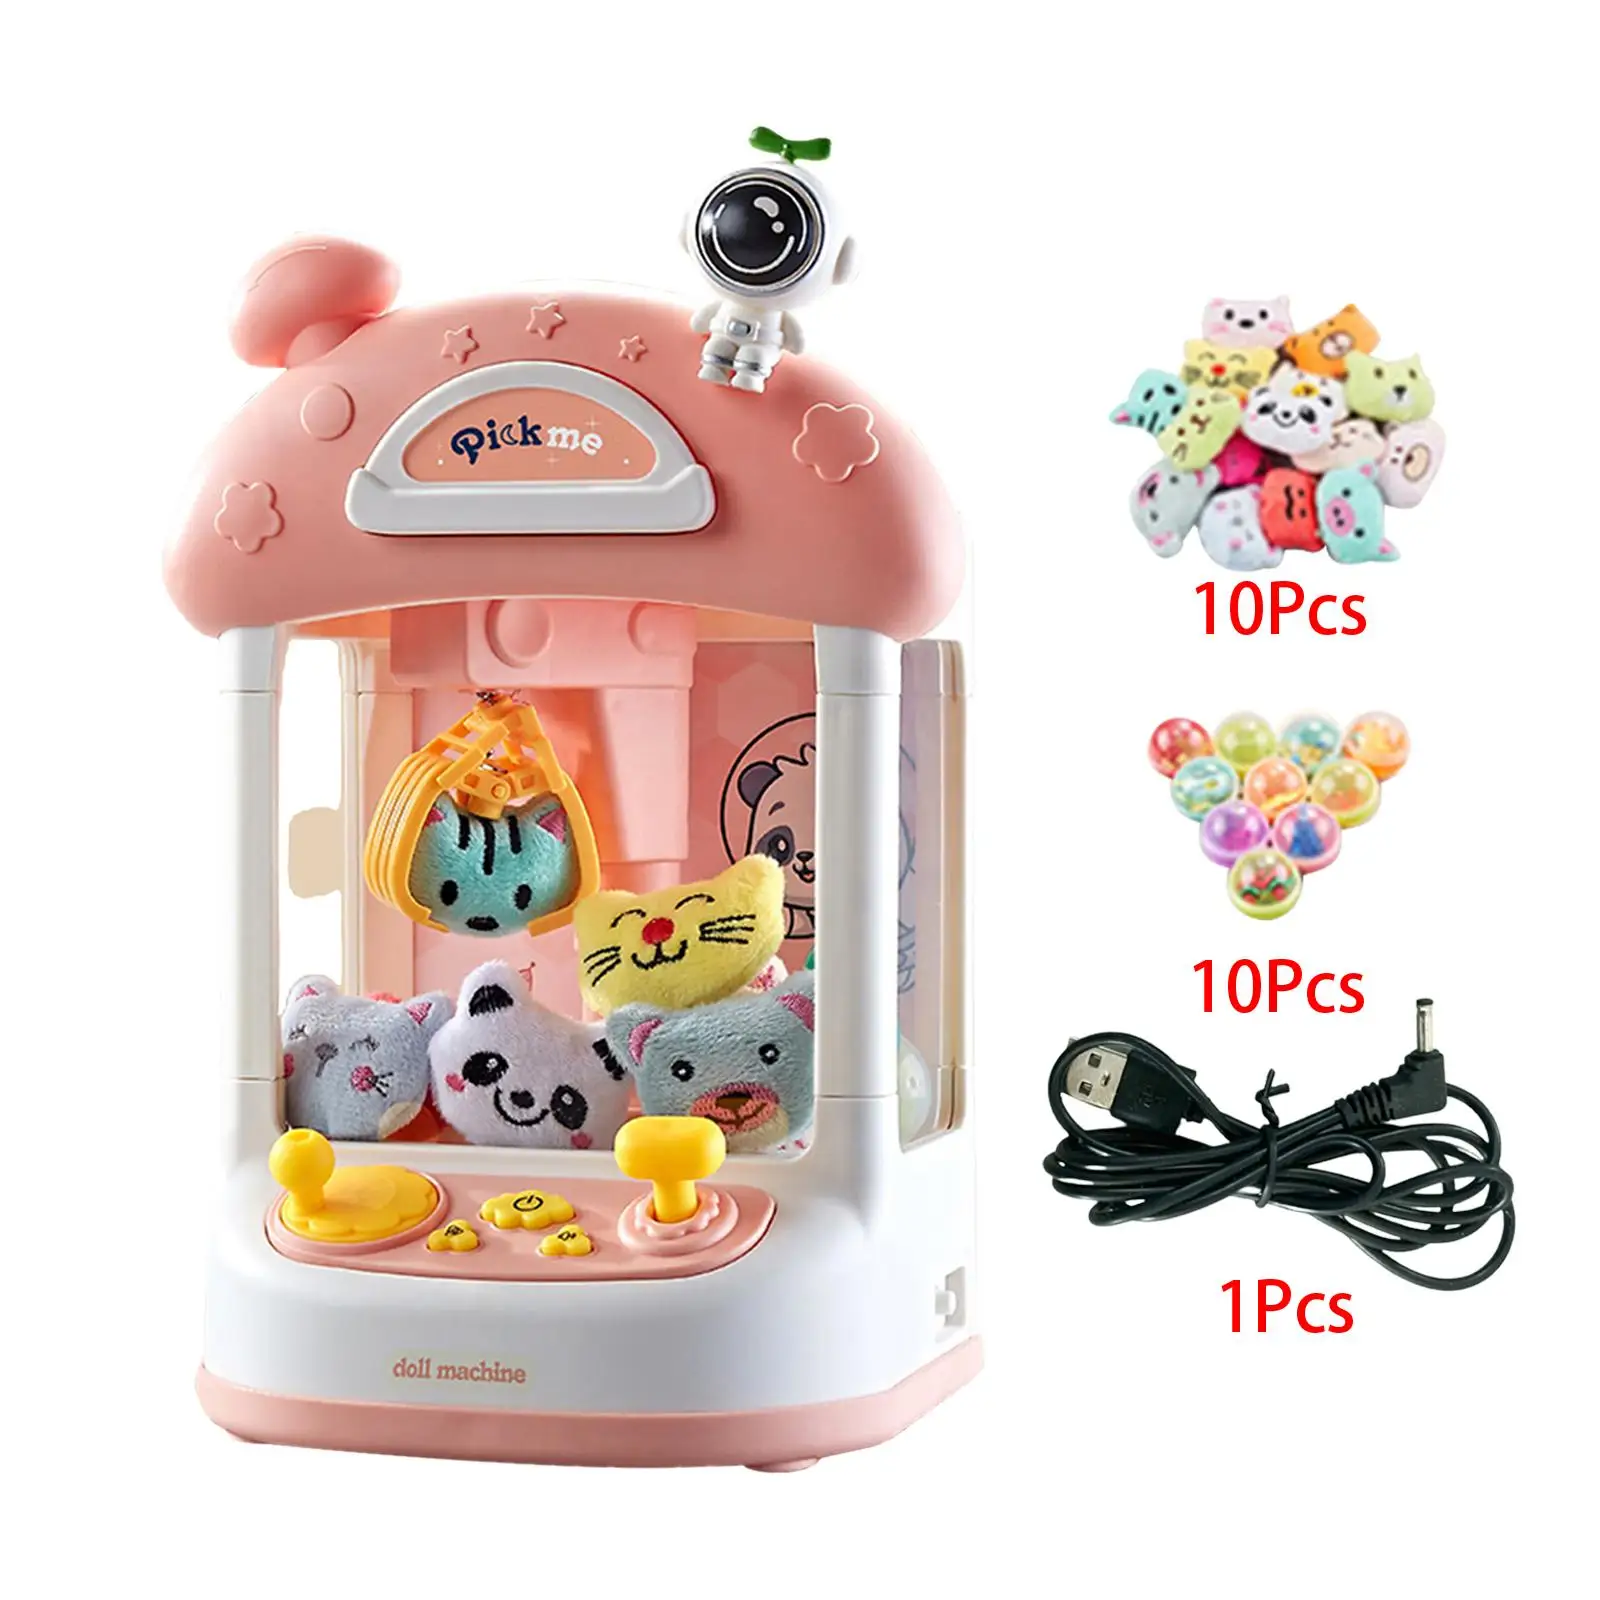 Claw Machine Indoor Toy Mini Claw Game Electronic Arcade Game Mini Vending Machines for Party Children Girls Kids Birthday Gifts